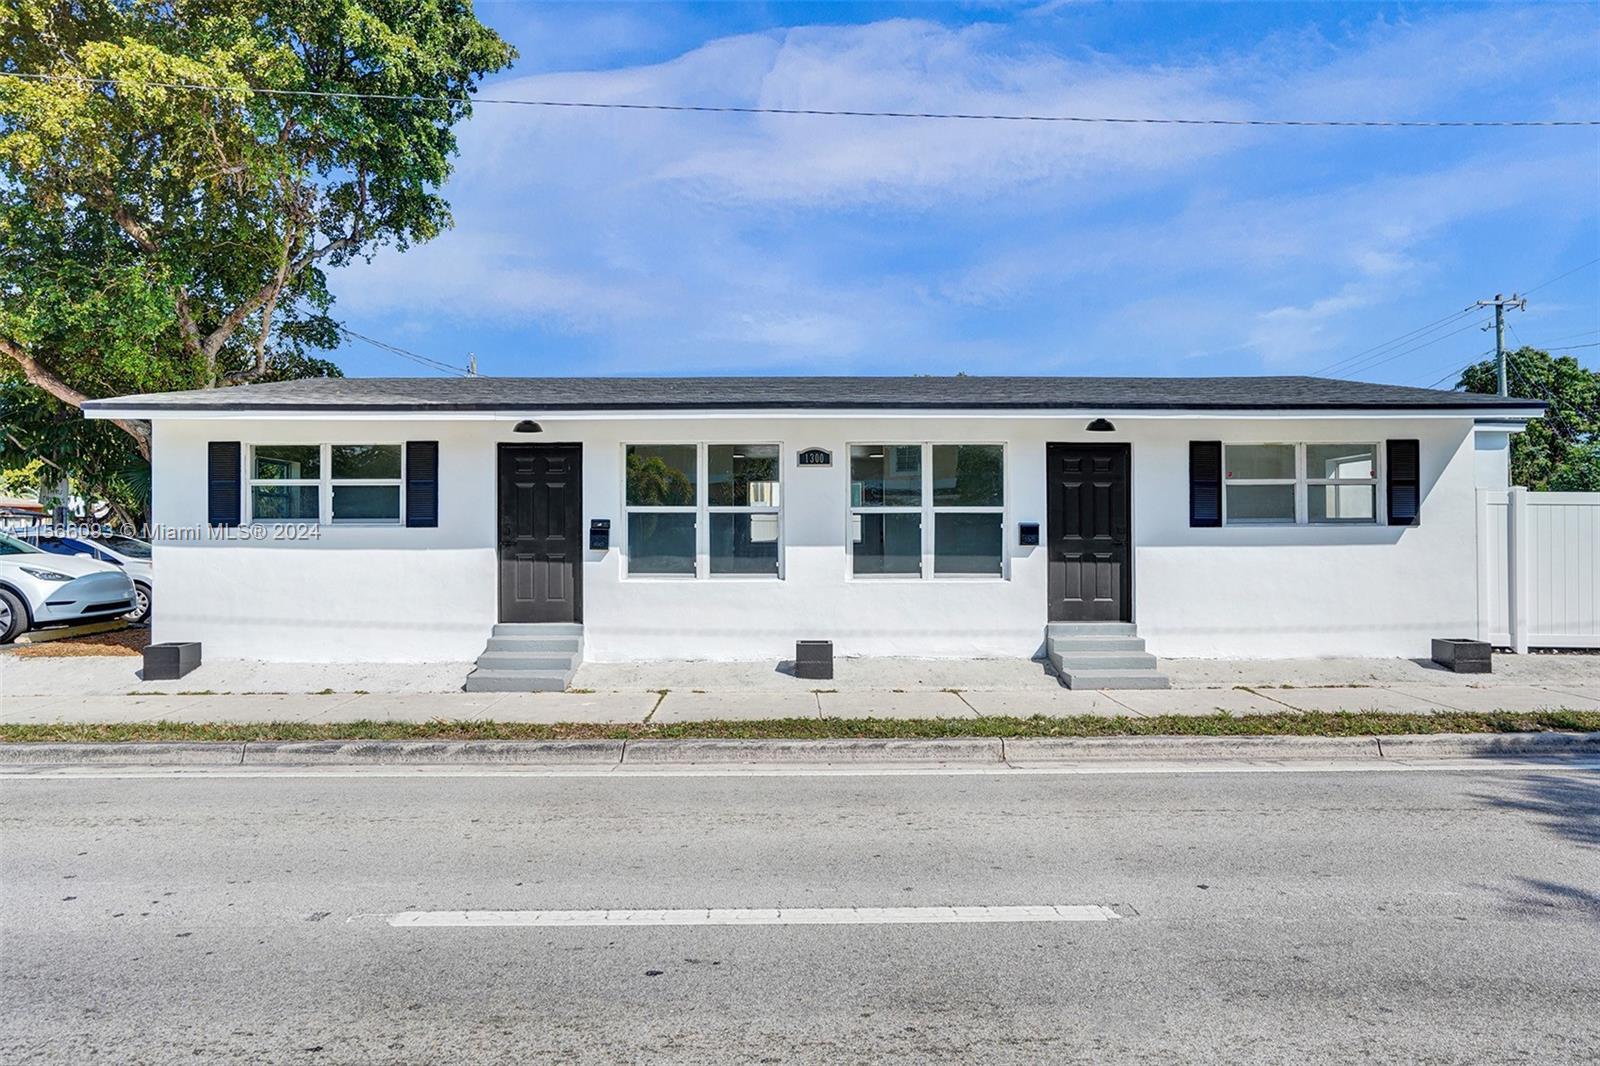 Introducing a remodeled income property boasting 2 units, each primed for short-term rental. Both un